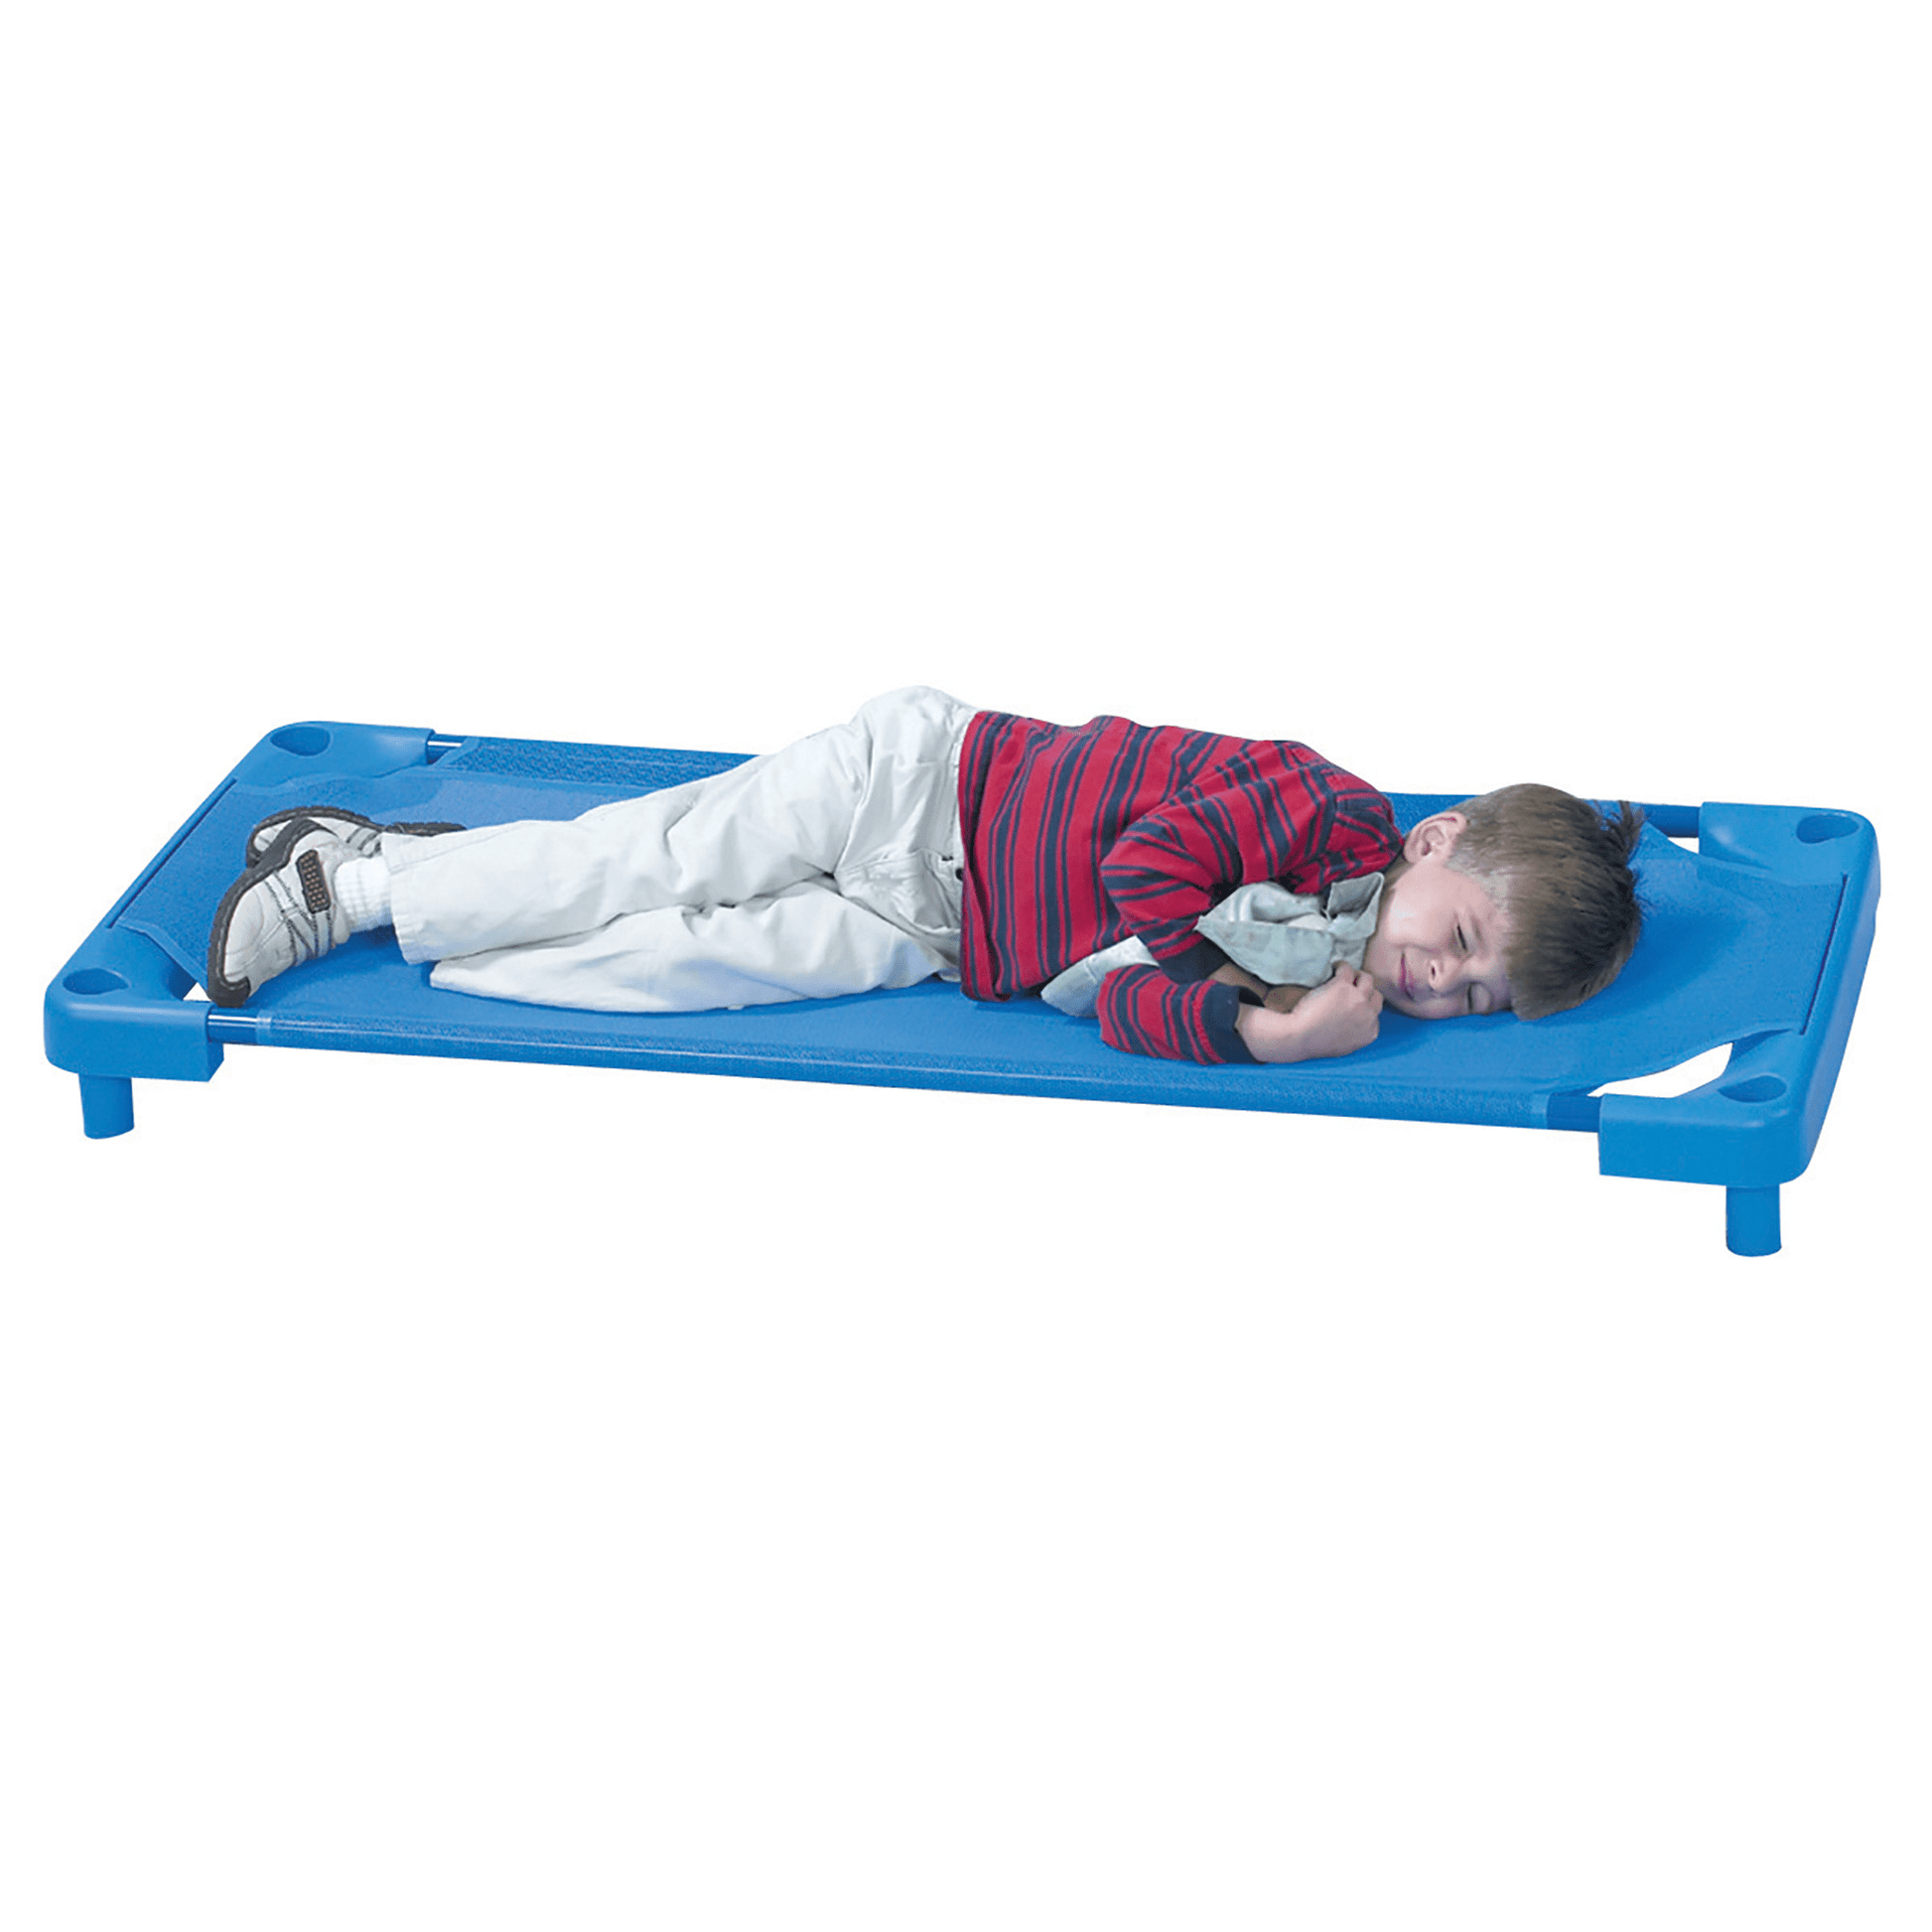 Angeles Full Size Cot - Set of 5 (CF005-002) - SchoolOutlet